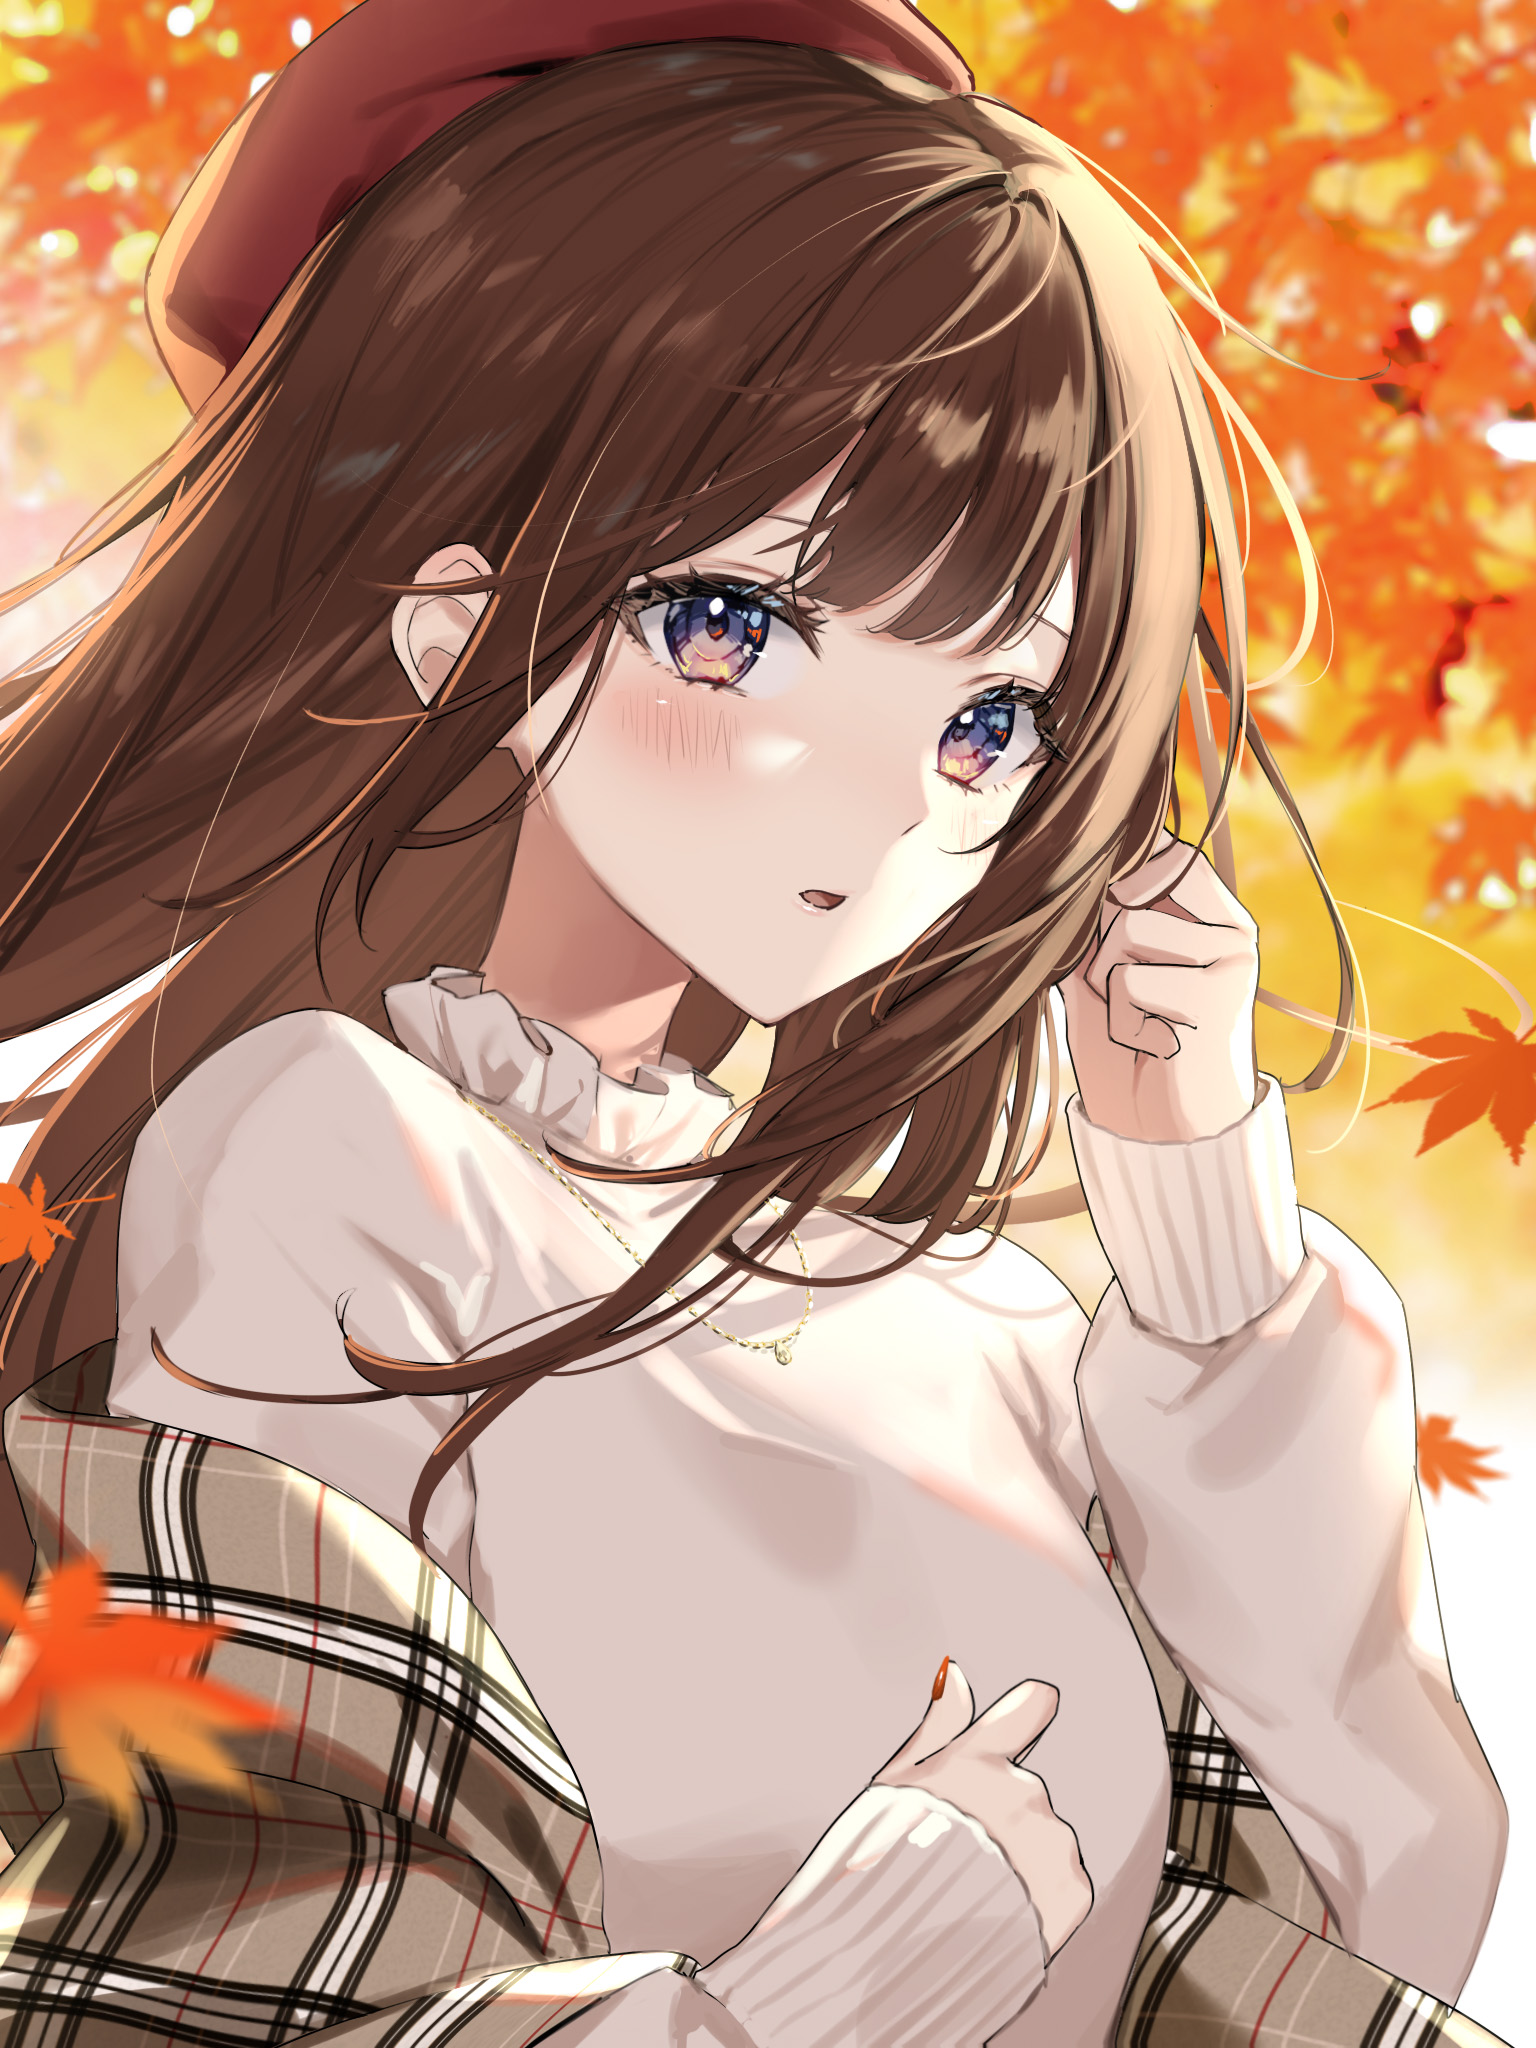 Autumn Girls with Autumn Leaves